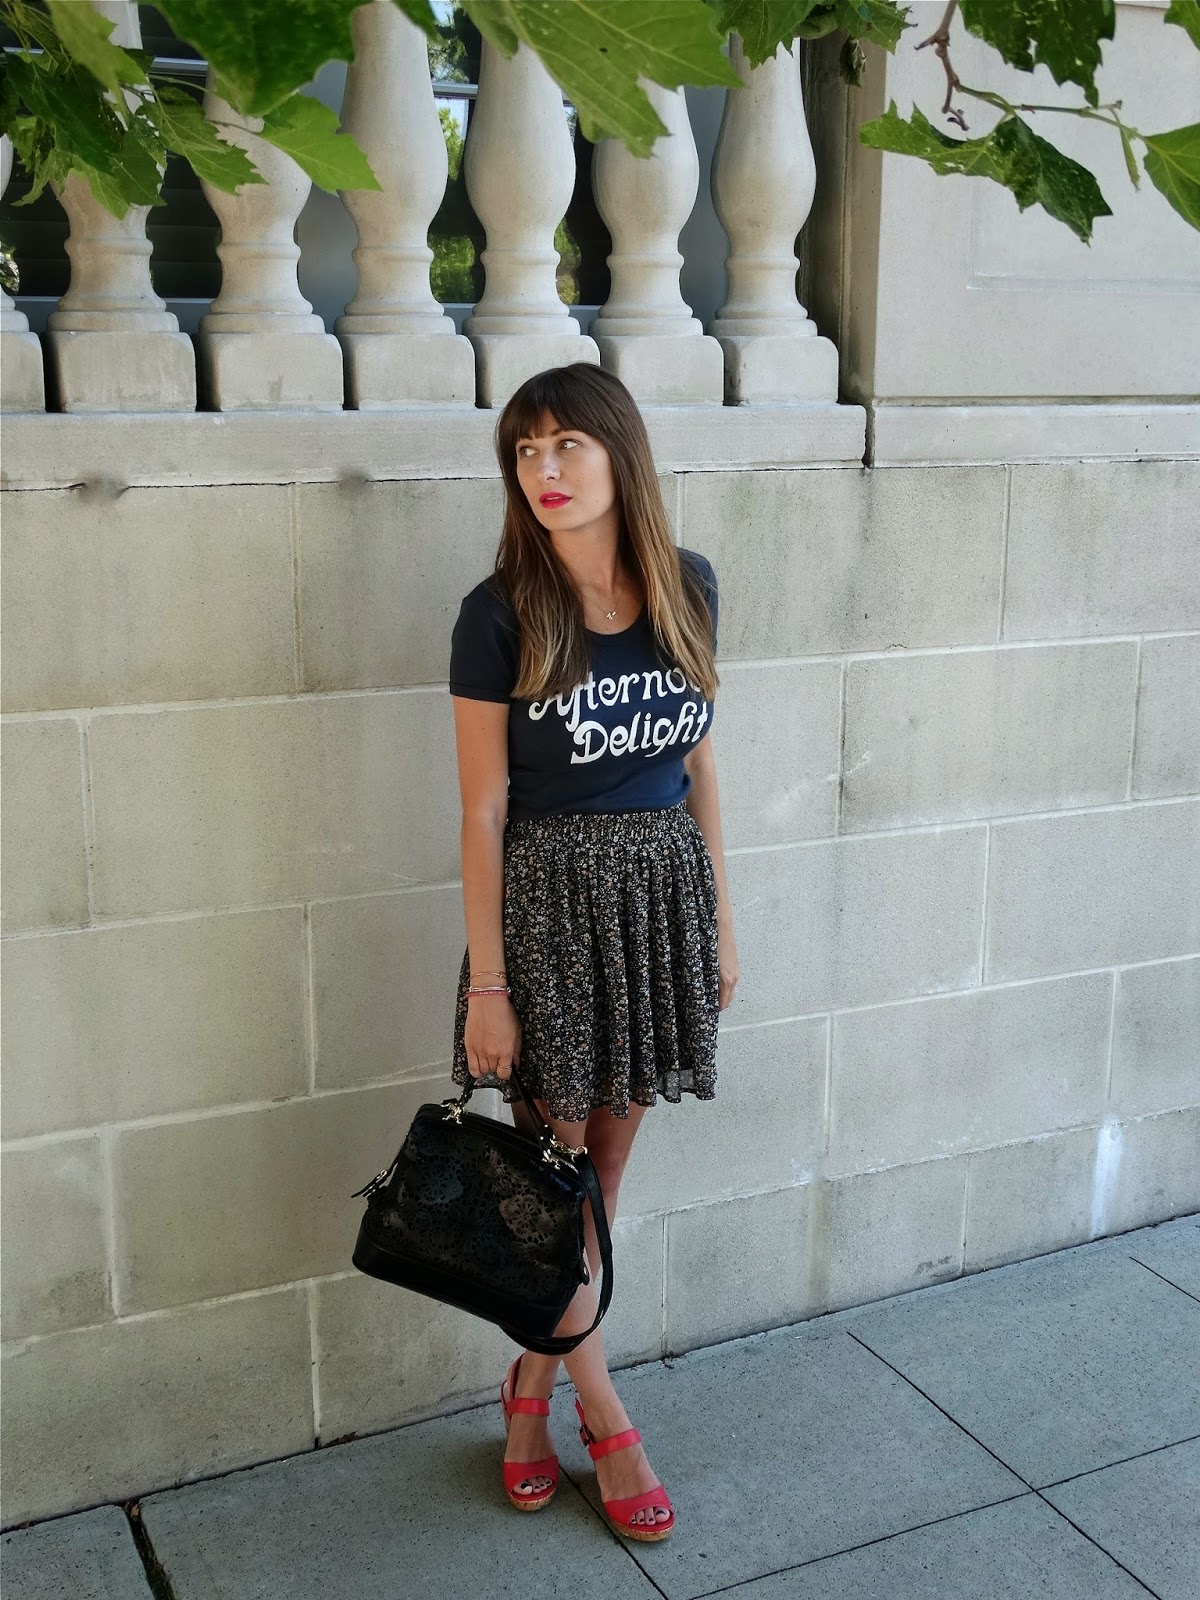 Afternoon Delight Tshirt from Urban Outfitters, worn by fashion blogger Jen of House Of Jeffers | www.houseofjeffers.com